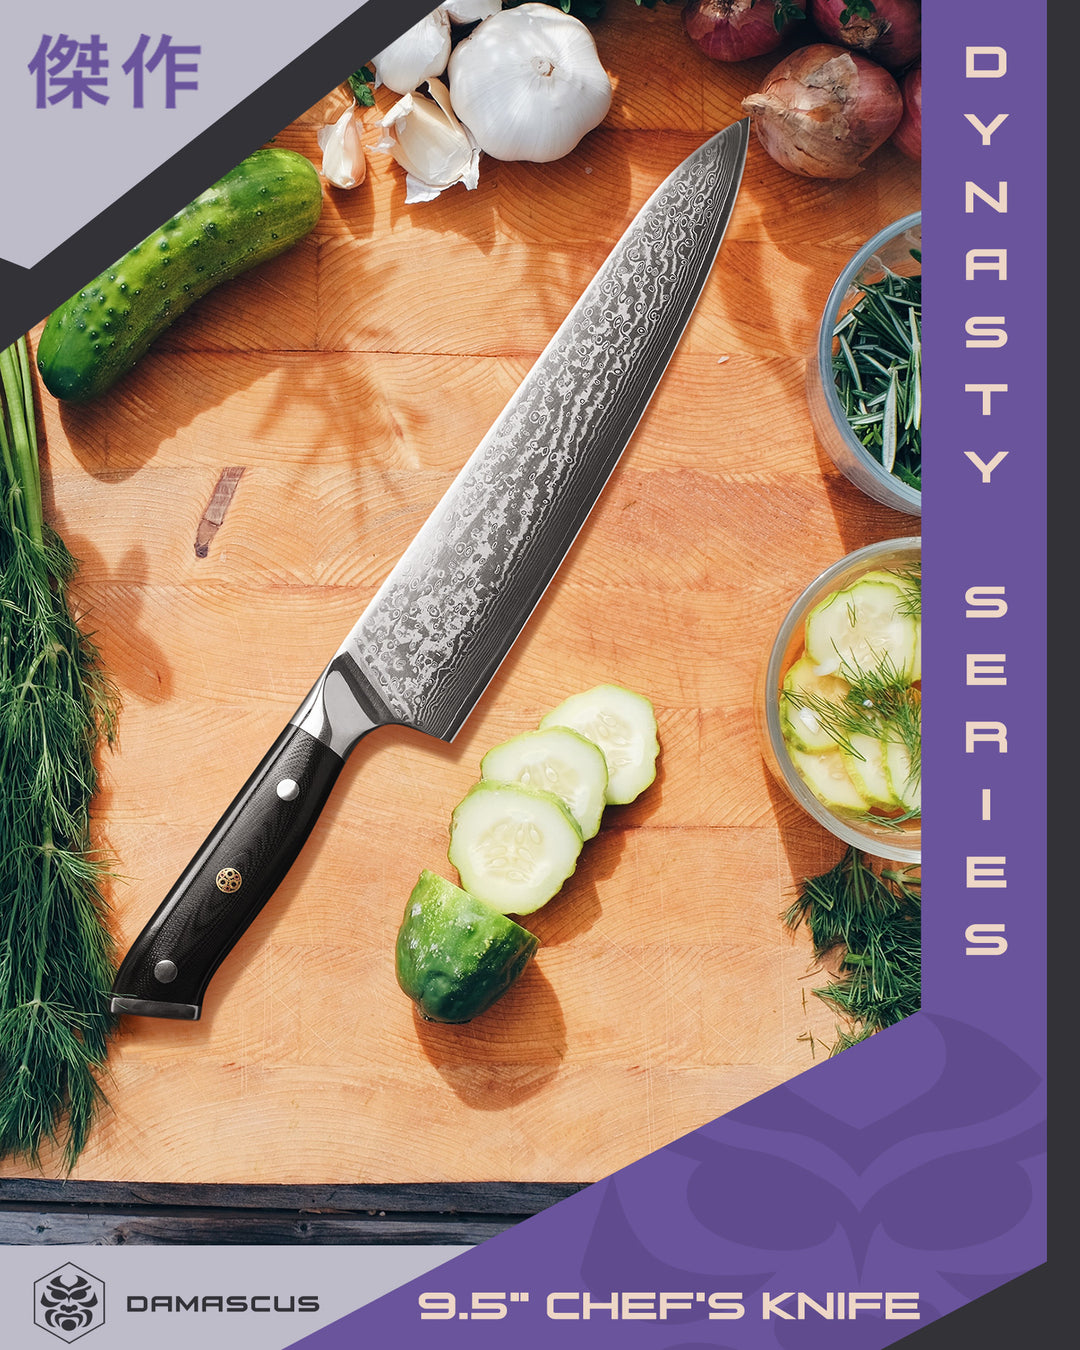 The 9.5" Damascus Chef's Knife surrounded by vegetables